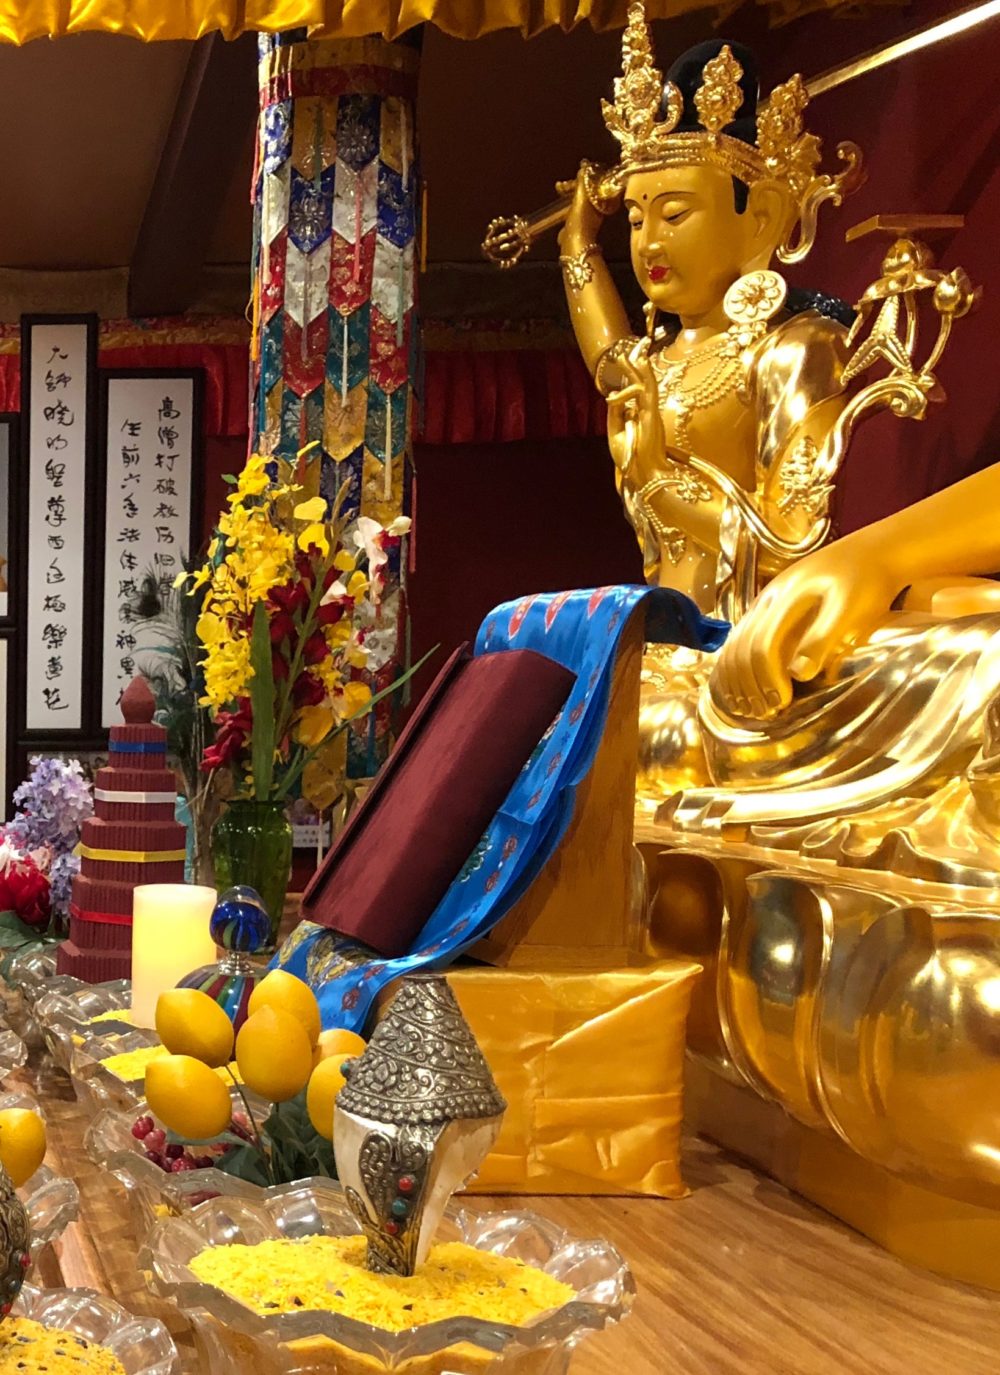 Manjurshri Bodhisattva stands guard over the Chinese edition of ‘Expounding the Absolute Truth Through the Heart Sutra’ on the altar in the Buddha Hall at the Holy Vajrasana Temple.